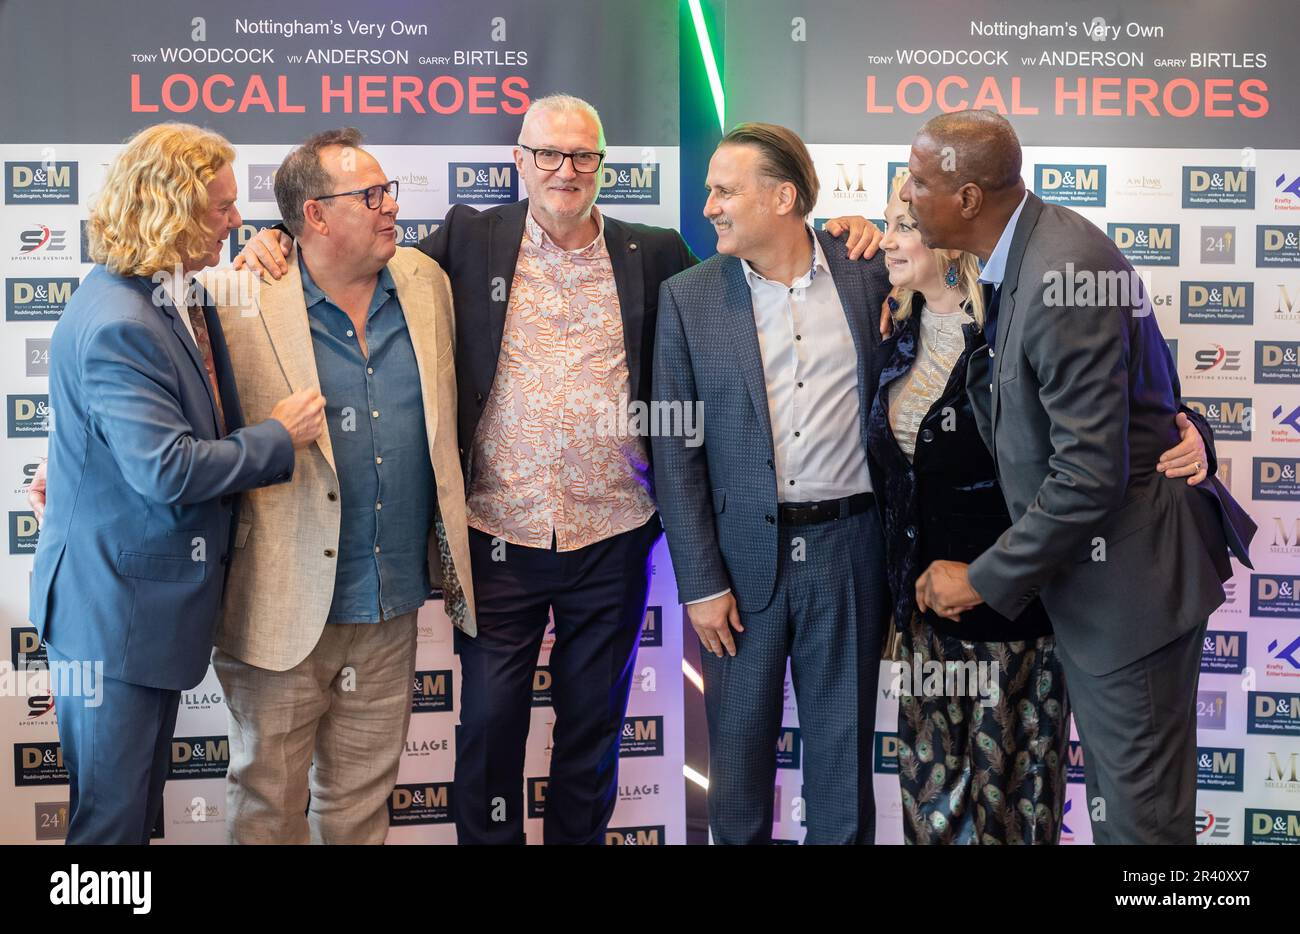 Tony Woodcock, John Warrington,Gary Birtles, Gary Webster, Wendy-Turner Webster and Viv Anderson (from left to right) during the World Premiere of the documentary Local Heroes at the Arc Cinema, Beeston, Nottingham on 25 May, 2023  (Photo by Ritchie Sumpter/Alamy Live News) Stock Photo